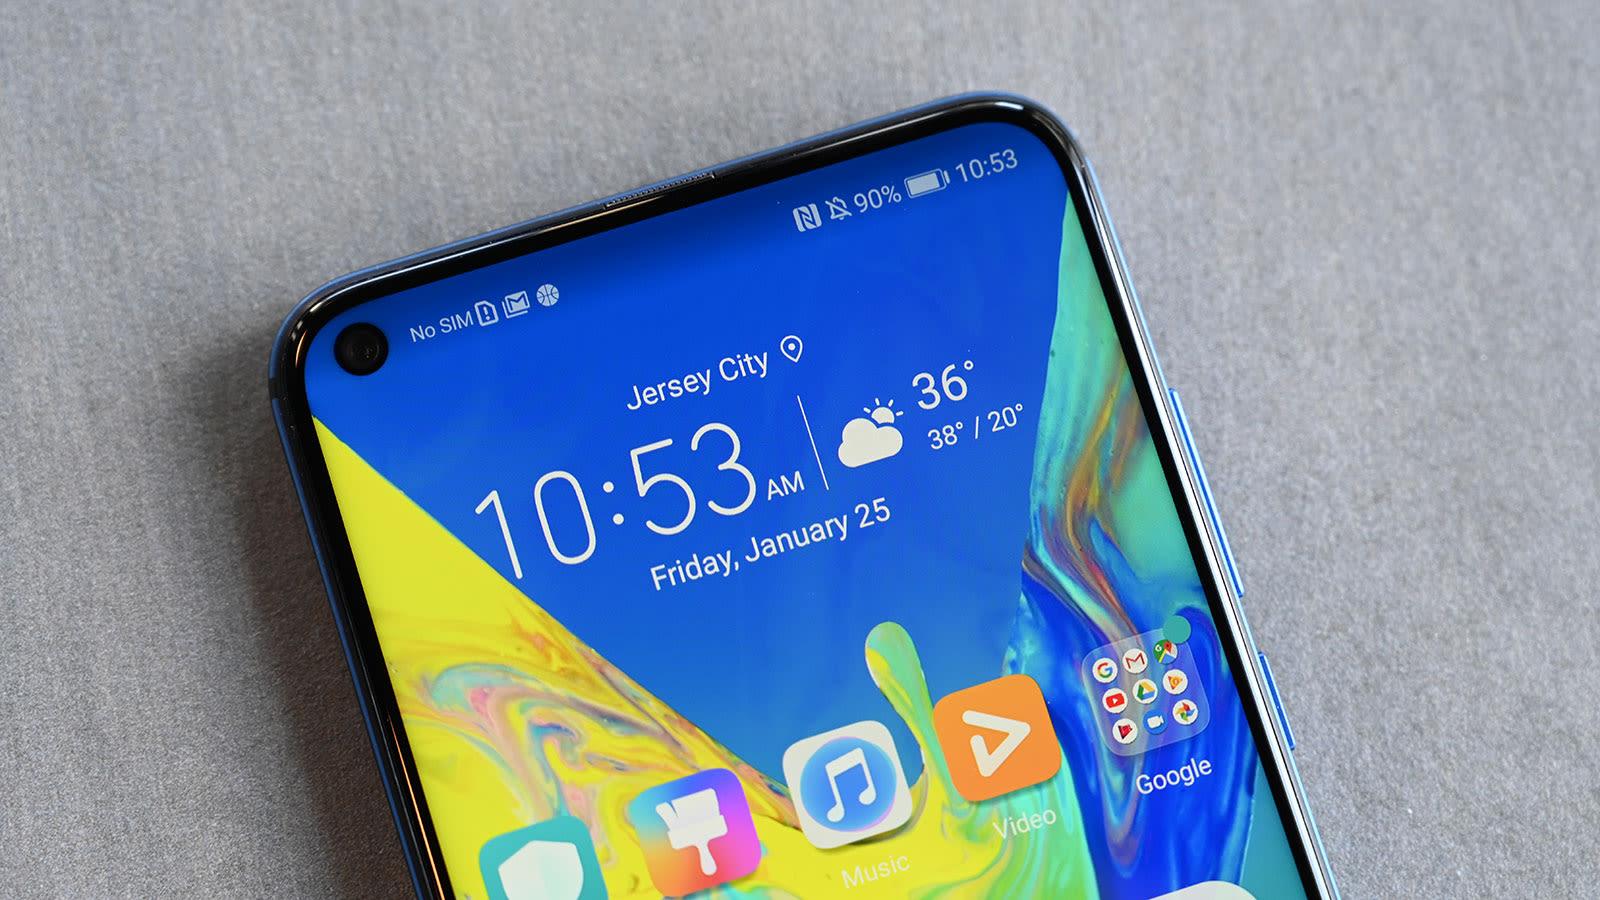 huawei honor view20 格安スマホ 送料込み 値下交渉可